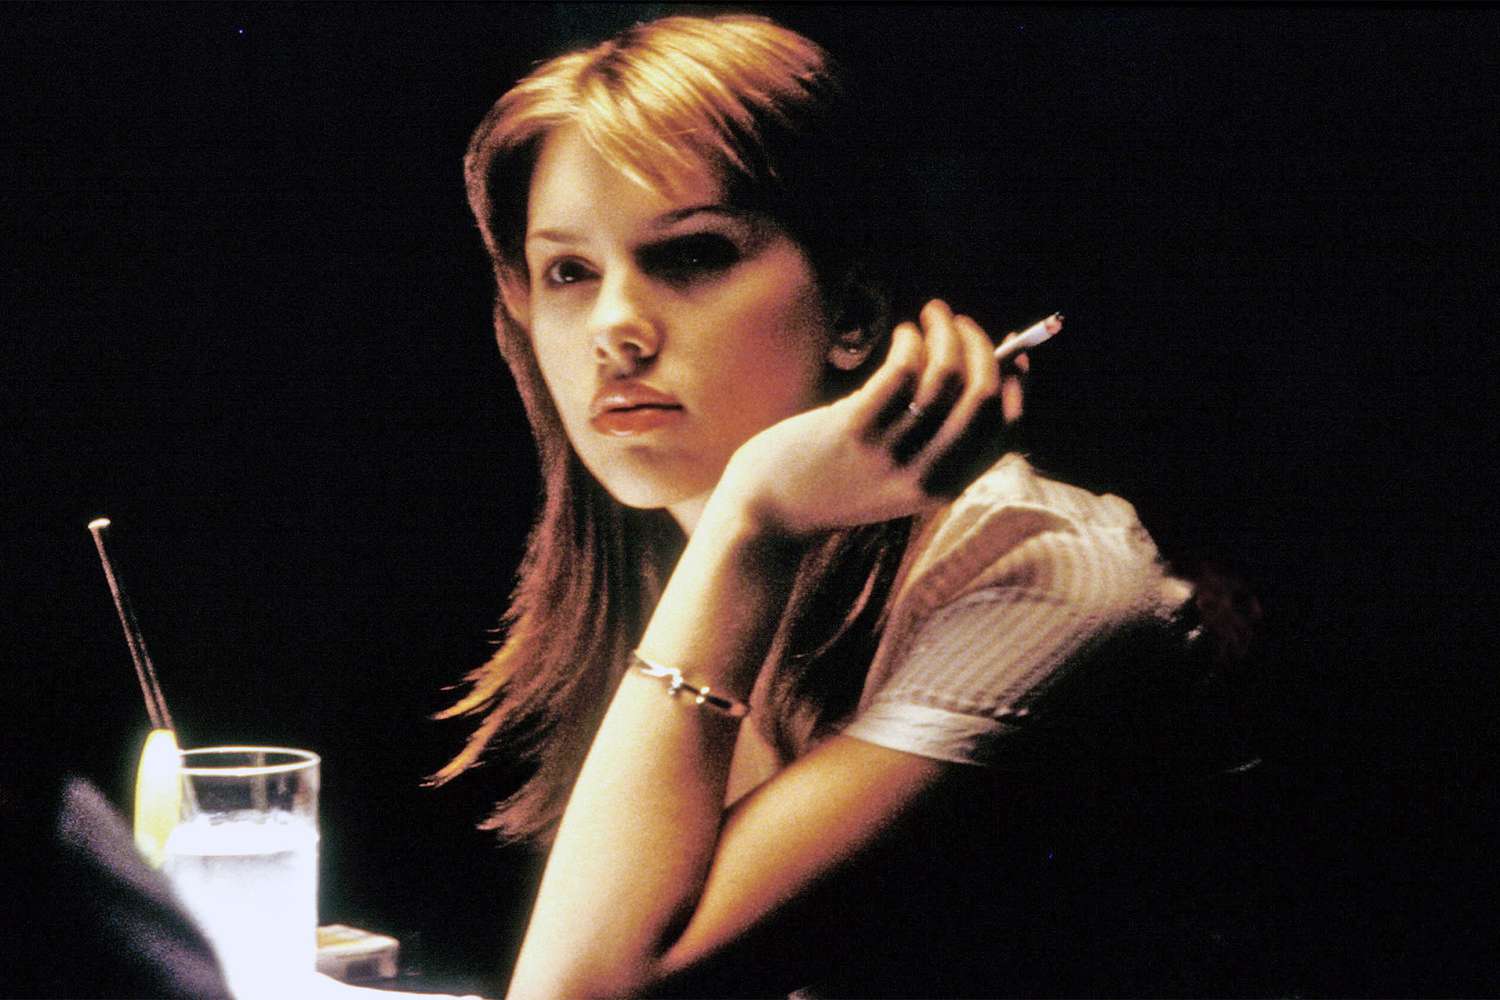 LOST IN TRANSLATION, Scarlett Johansson, 2003, (c) Focus Features/courtesy Everett Collection